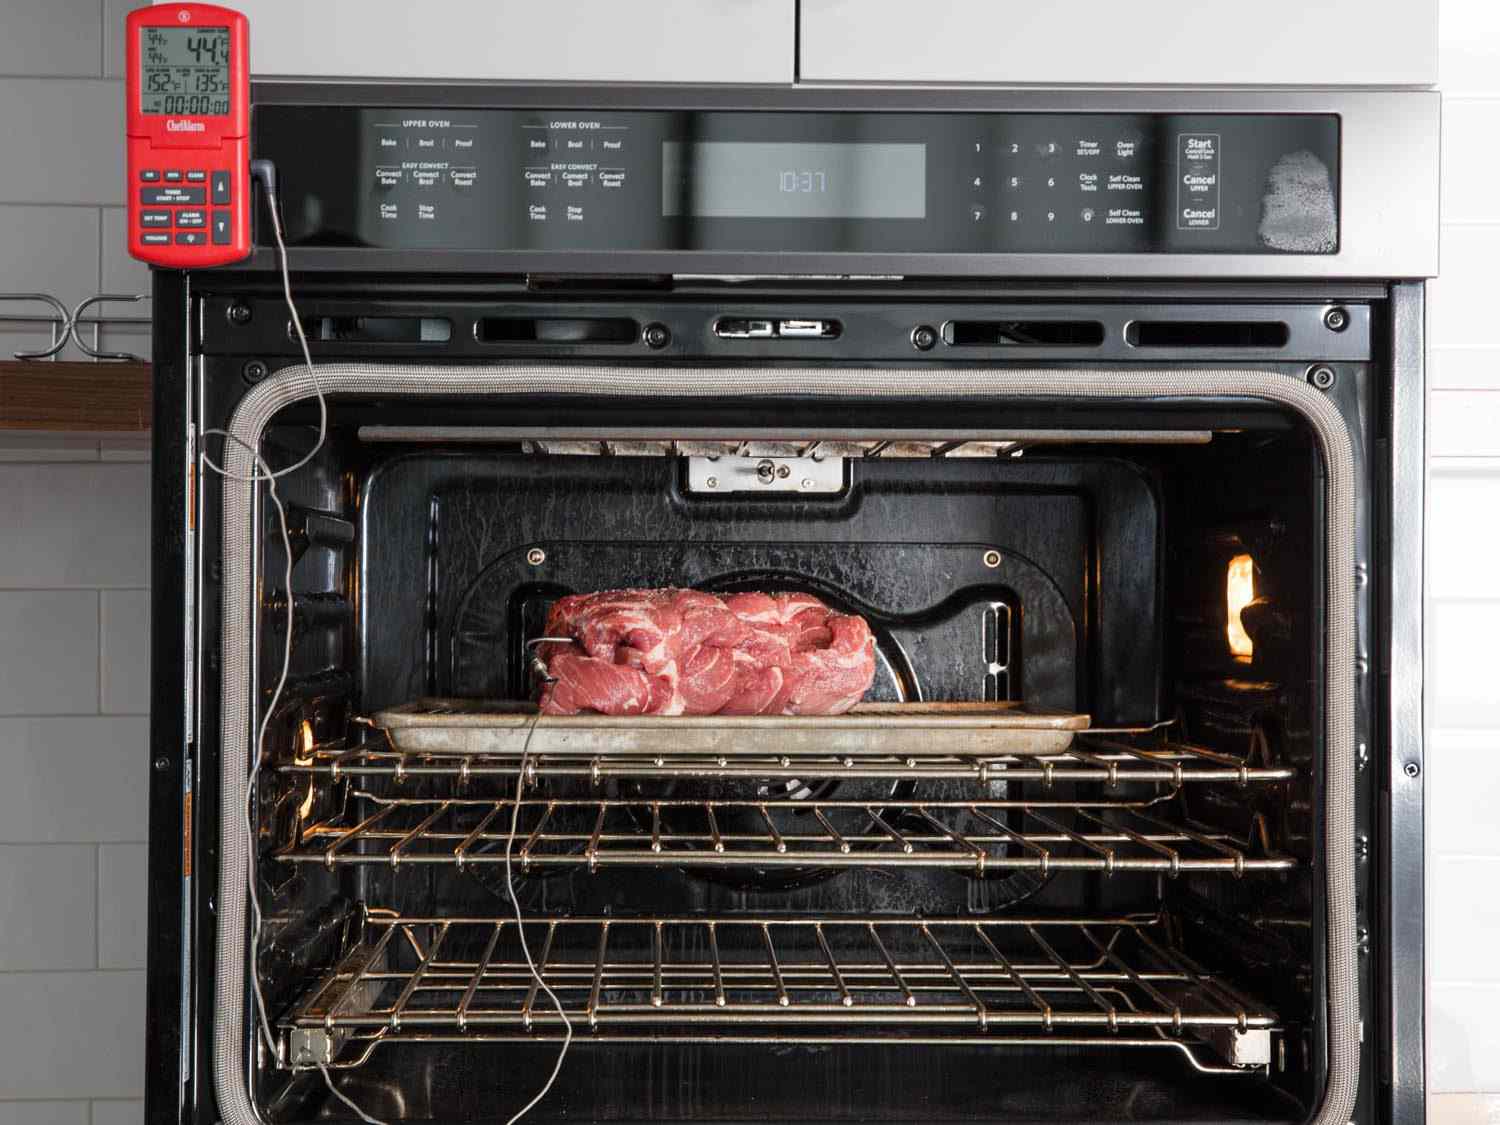 A pork loin roasting in the oven with a probe thermometer attached to it